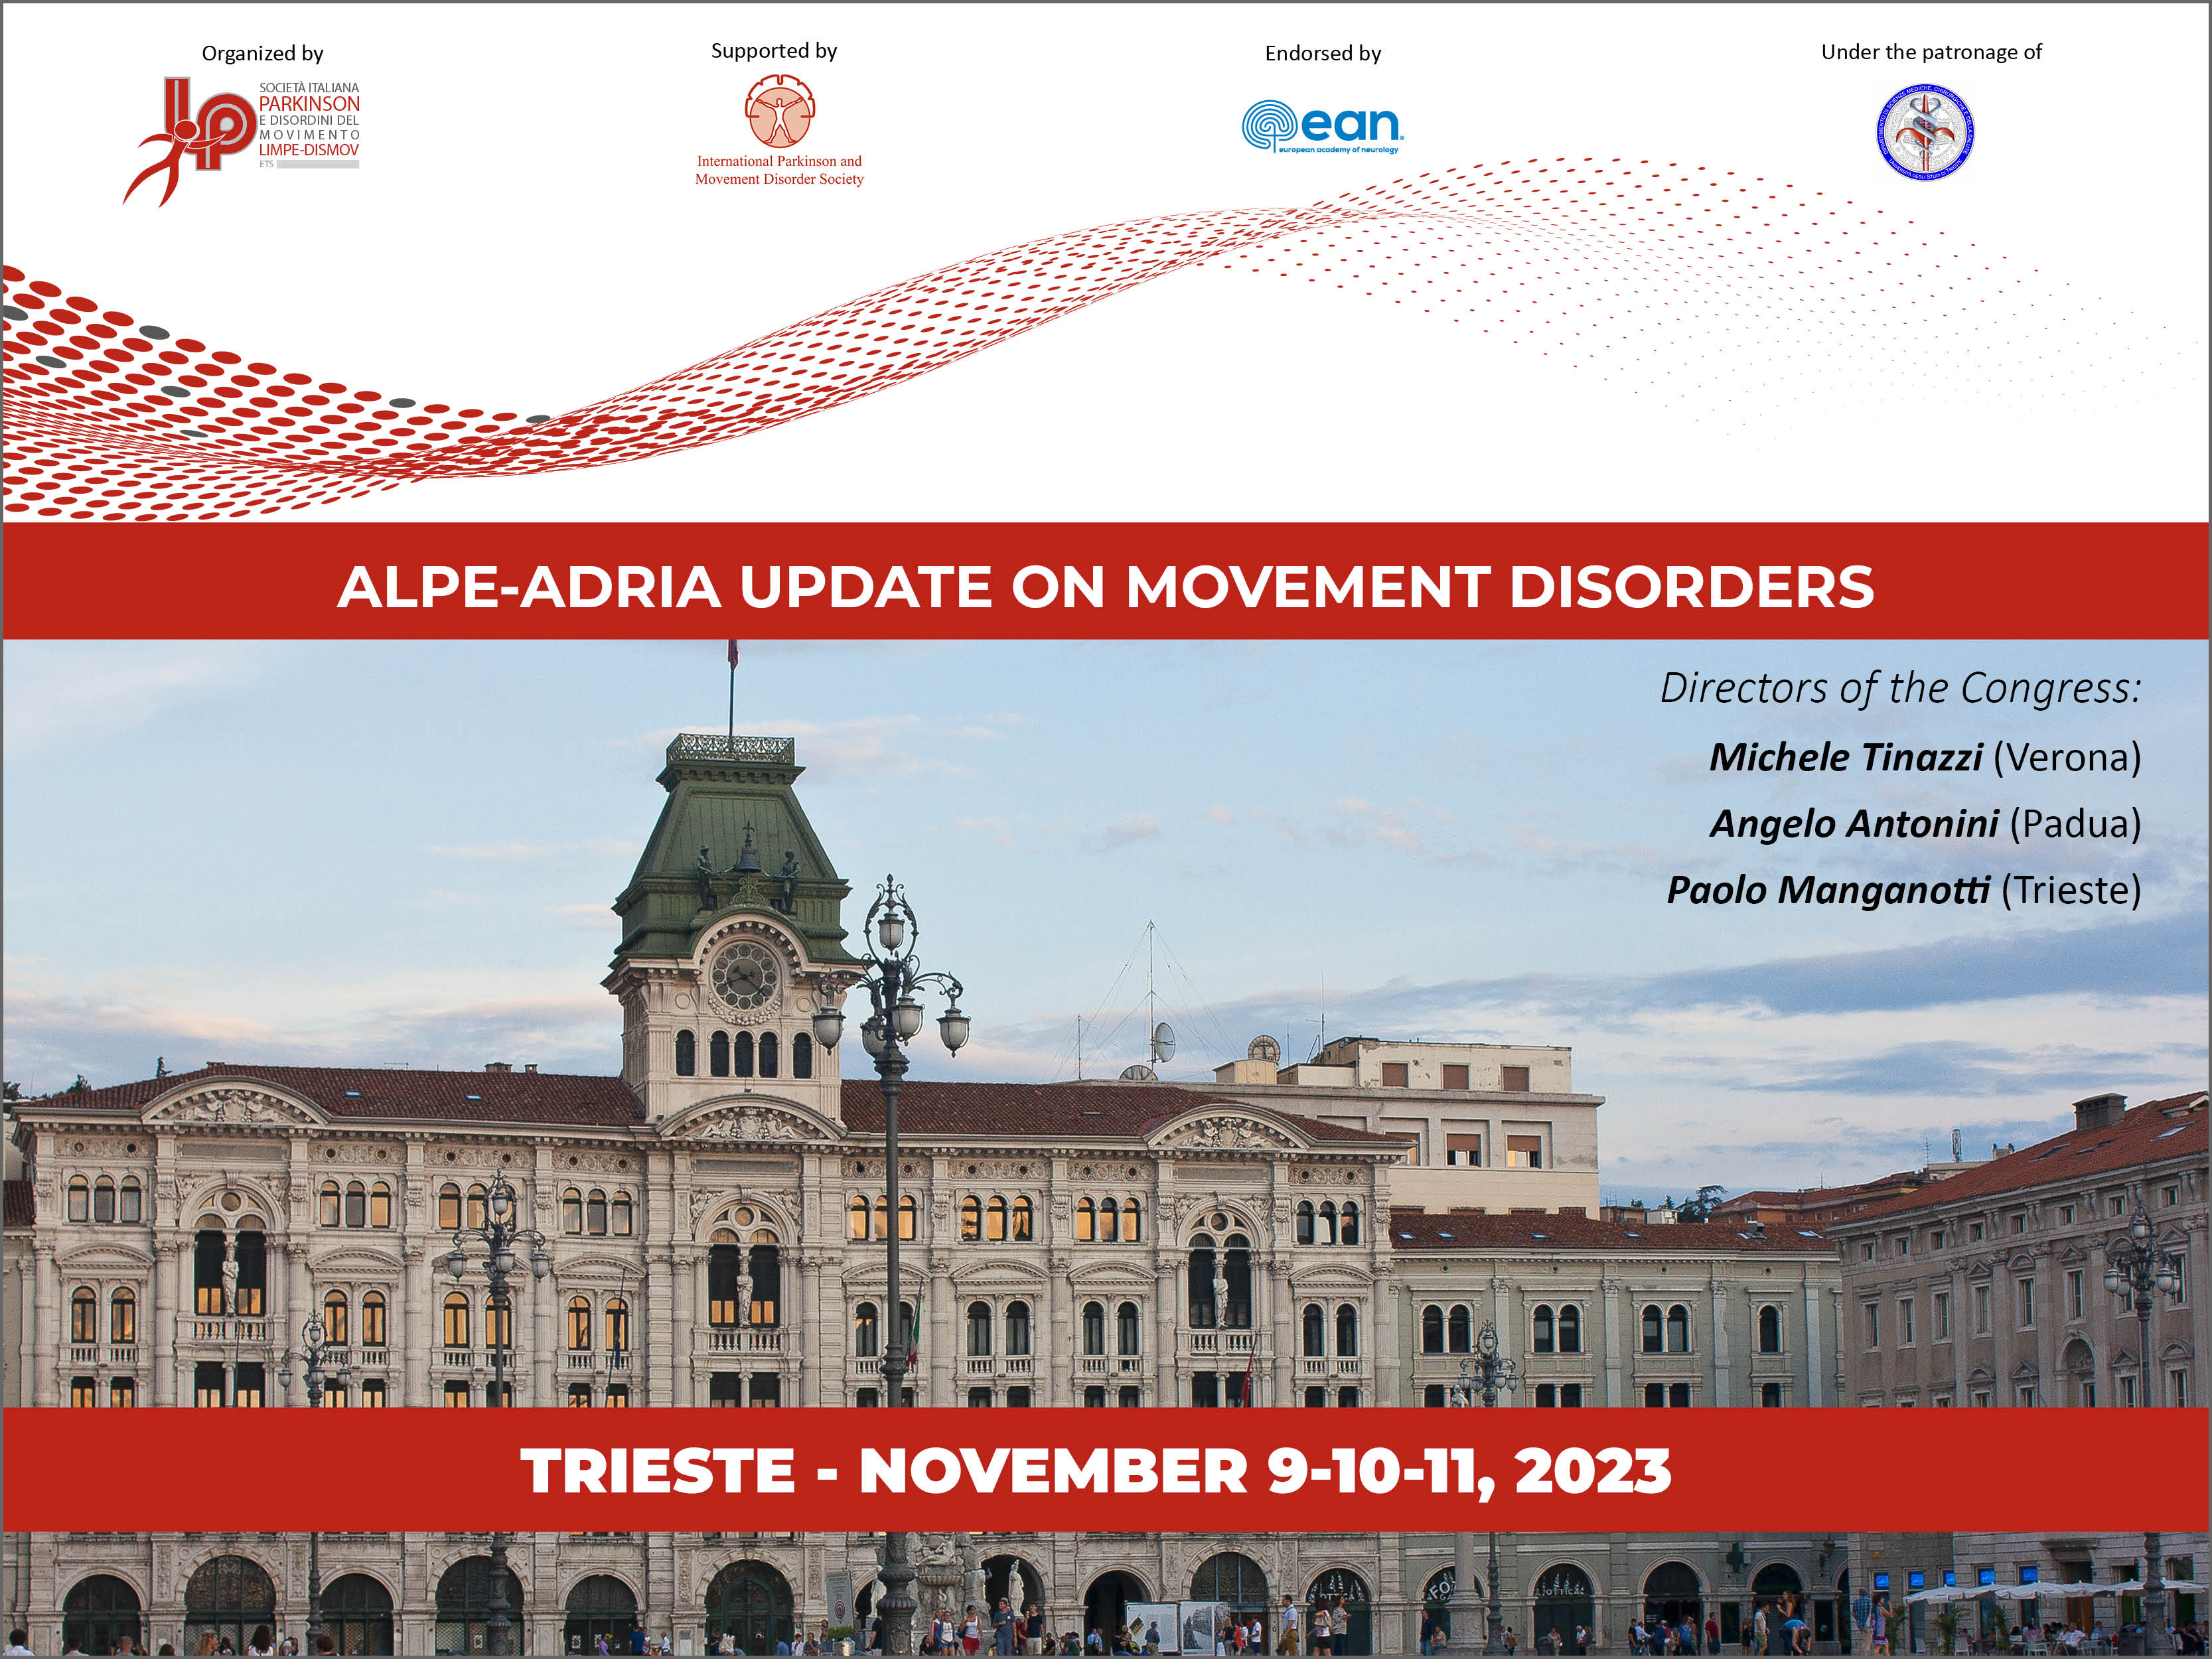 ALPE ADRIA Update on Movement Disorders Congress